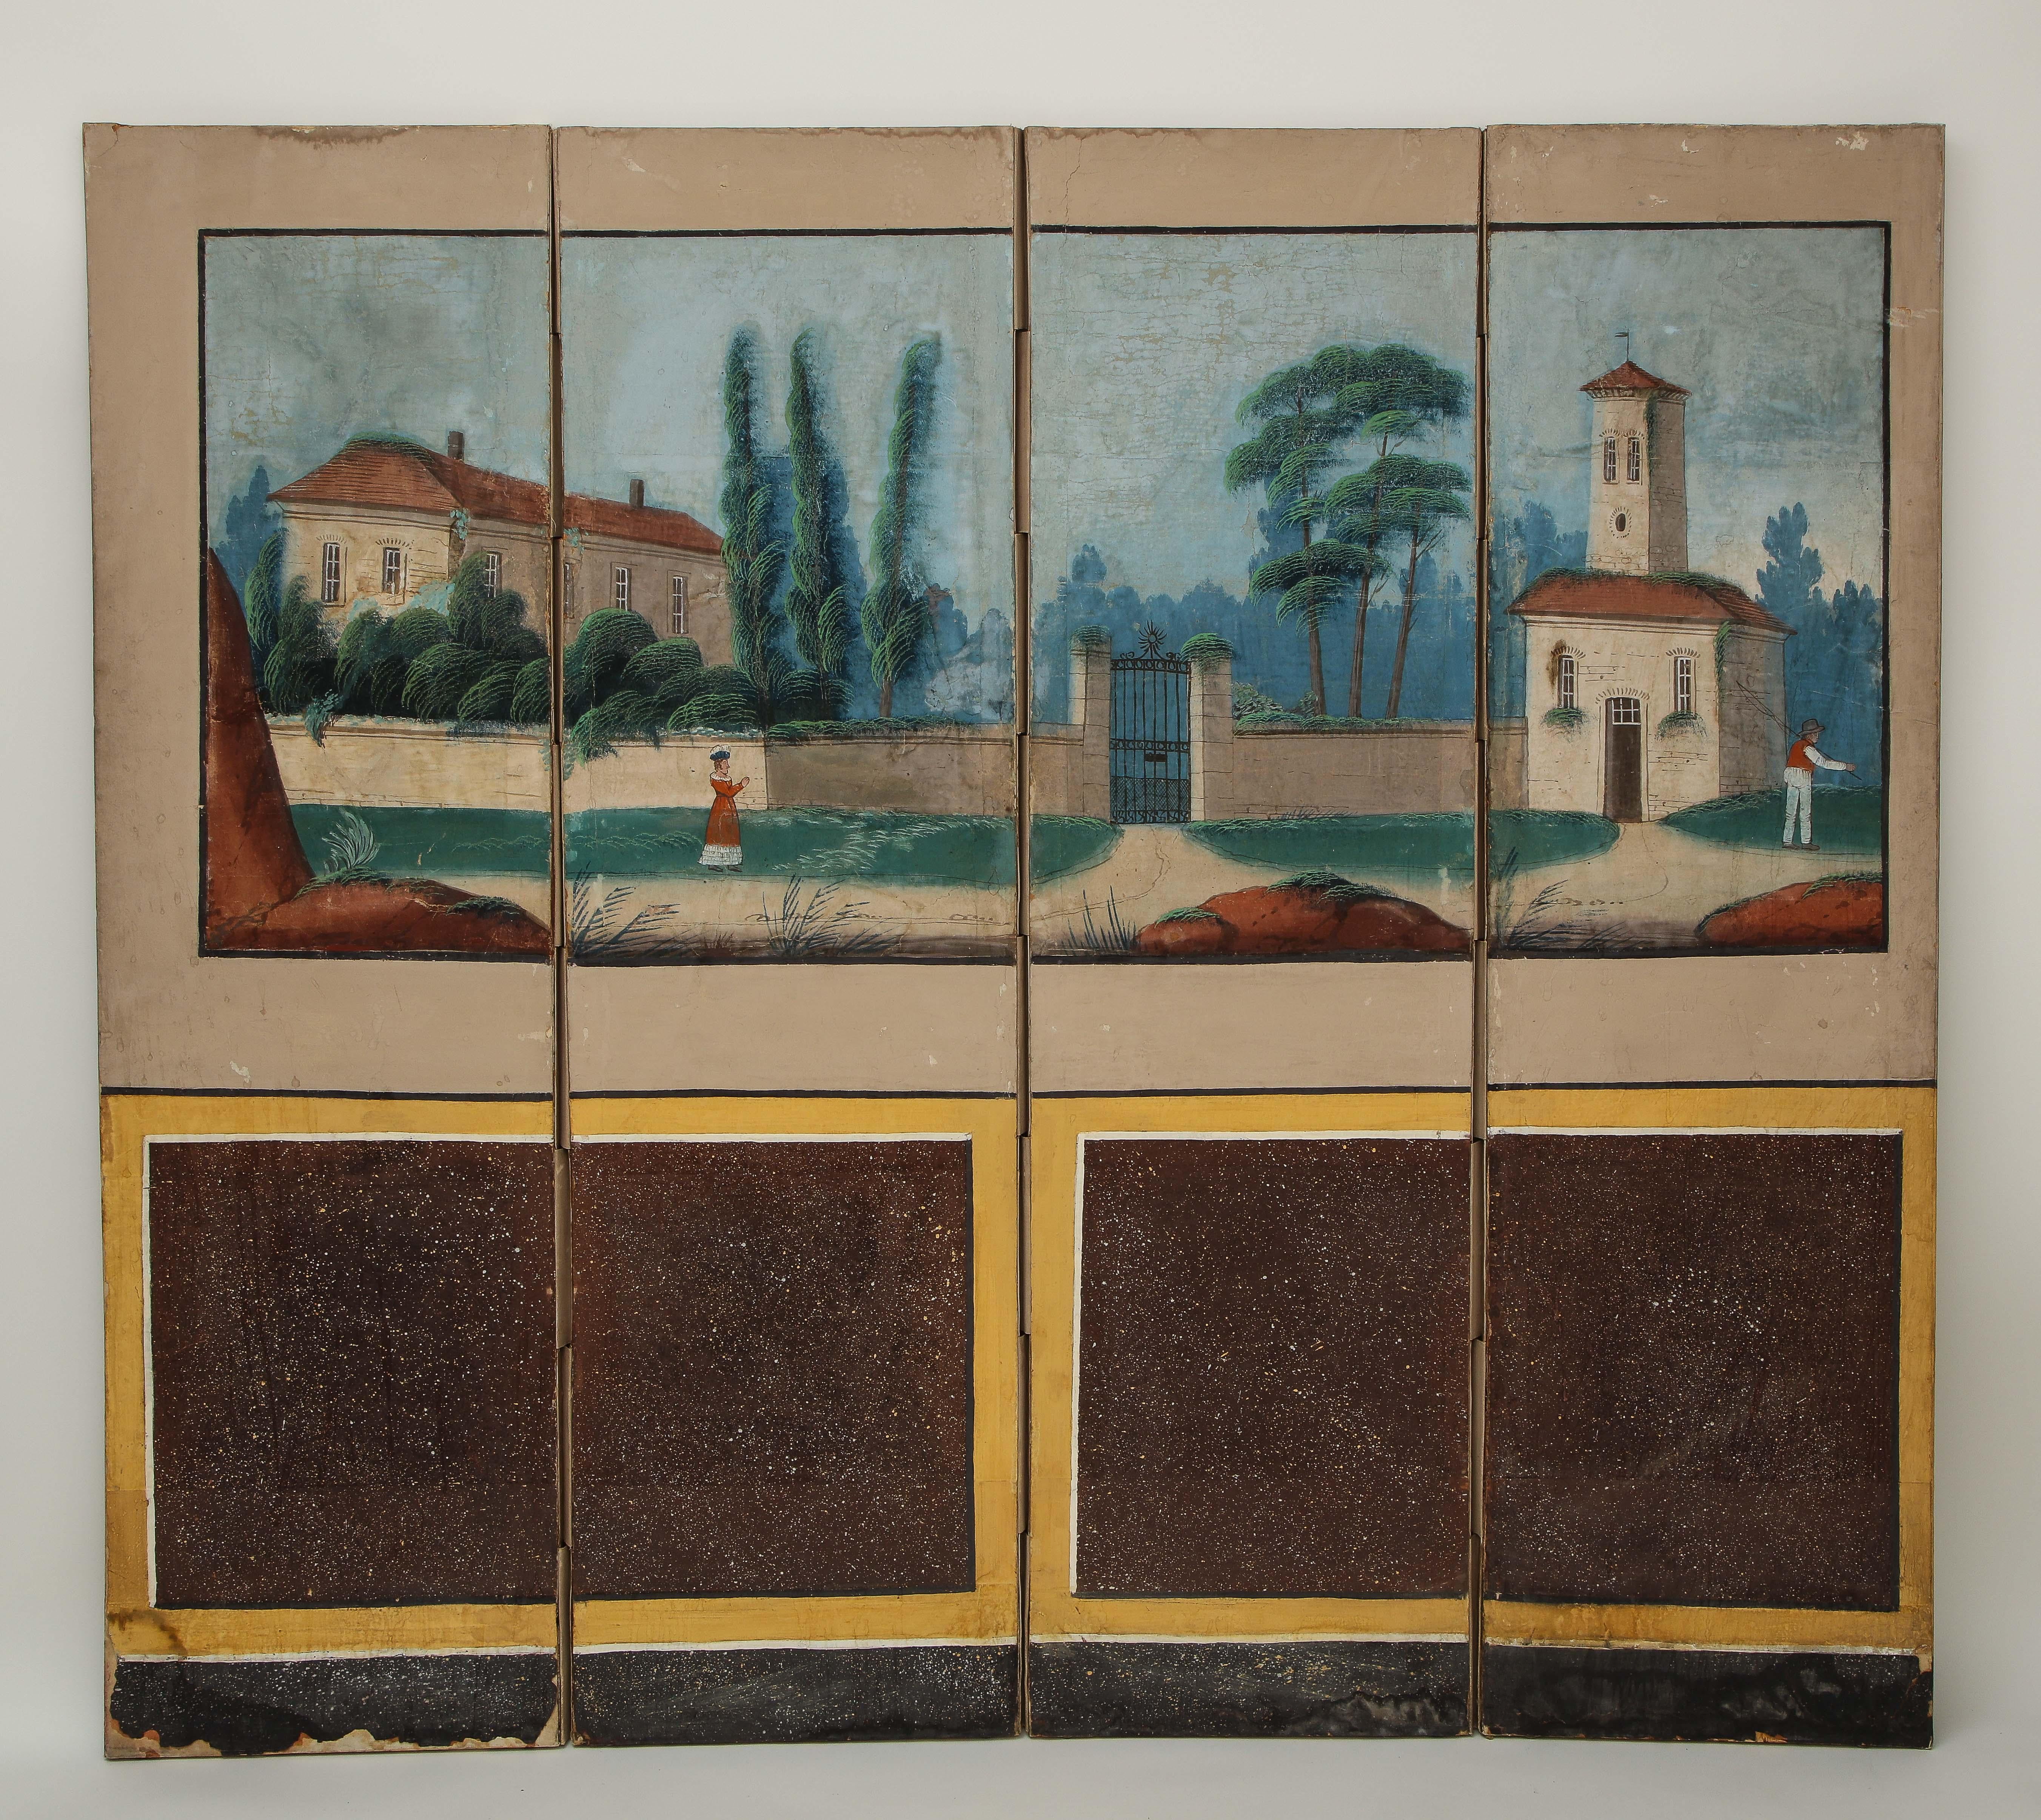 With charming pastoral scene of two figures in a Mediterranean landscape with red clay roof-tiled stucco buildings, set above faux porphyry paneling.